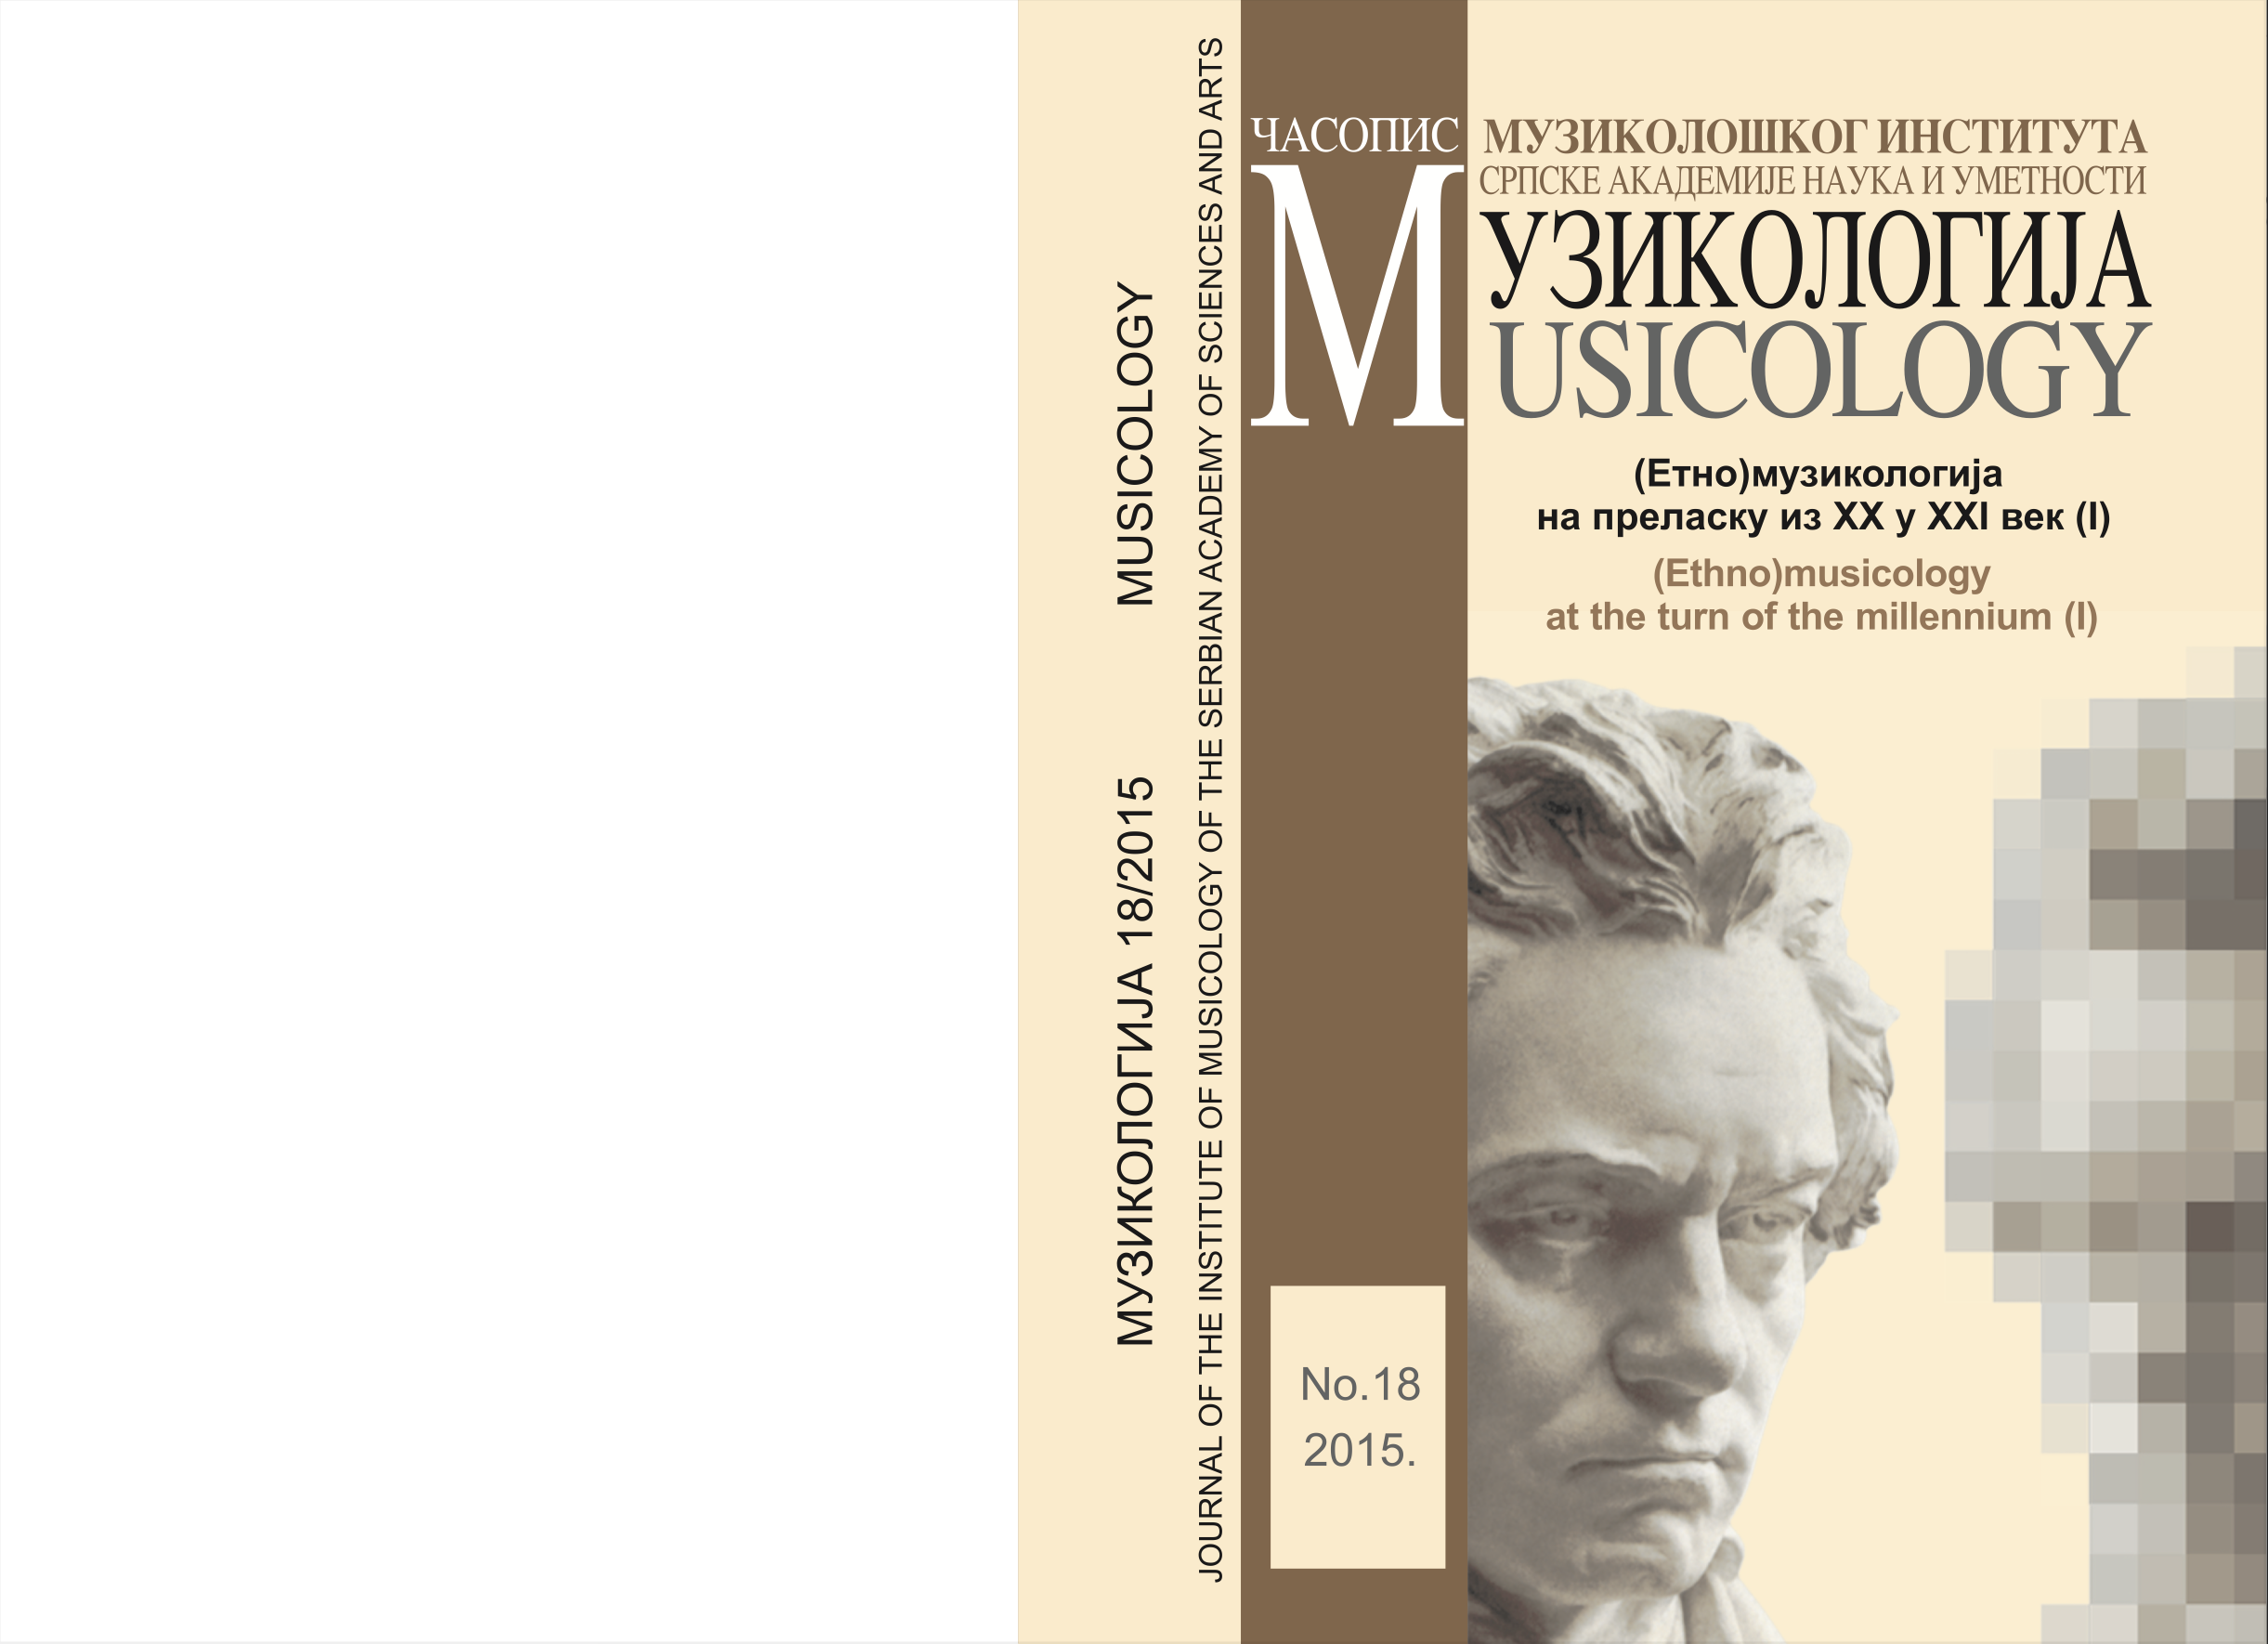 Cover pages of the 18th issue of the journal Musicology.